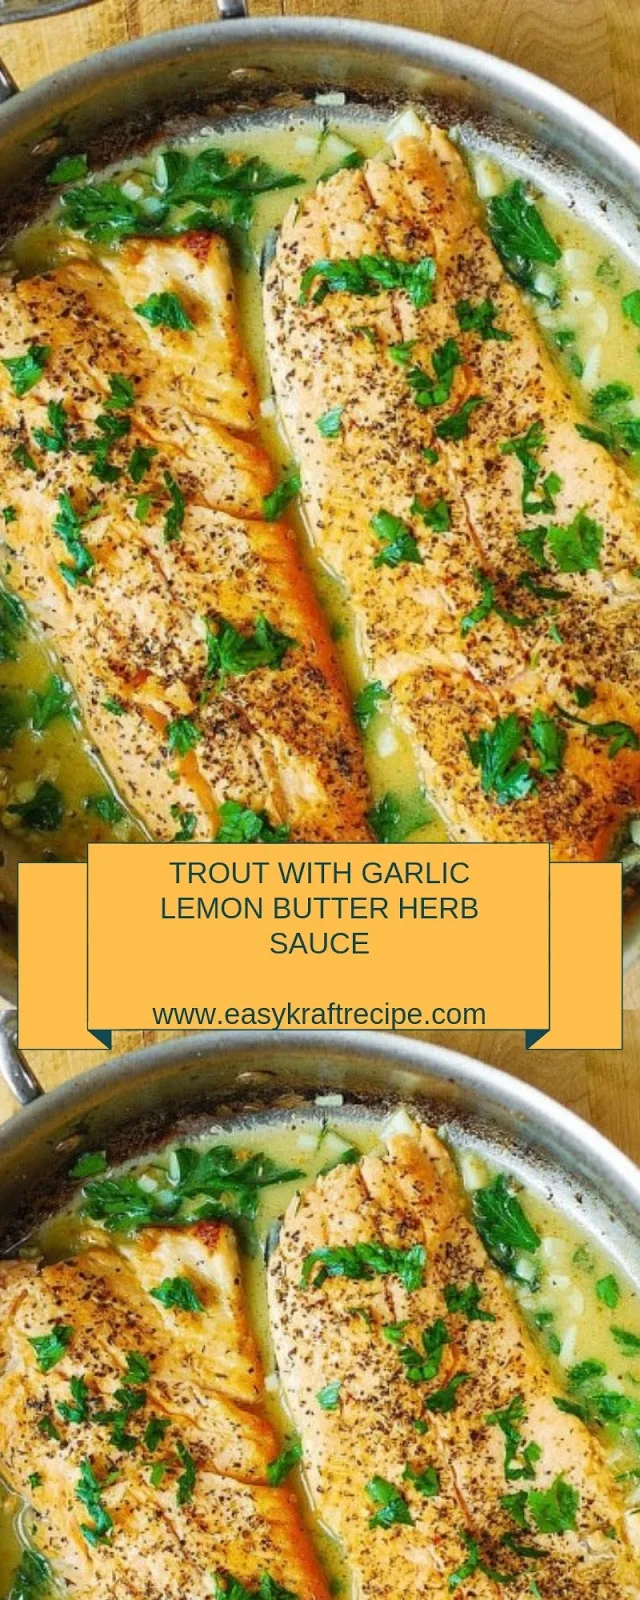 TROUT WITH GARLIC LEMON BUTTER HERB SAUCE